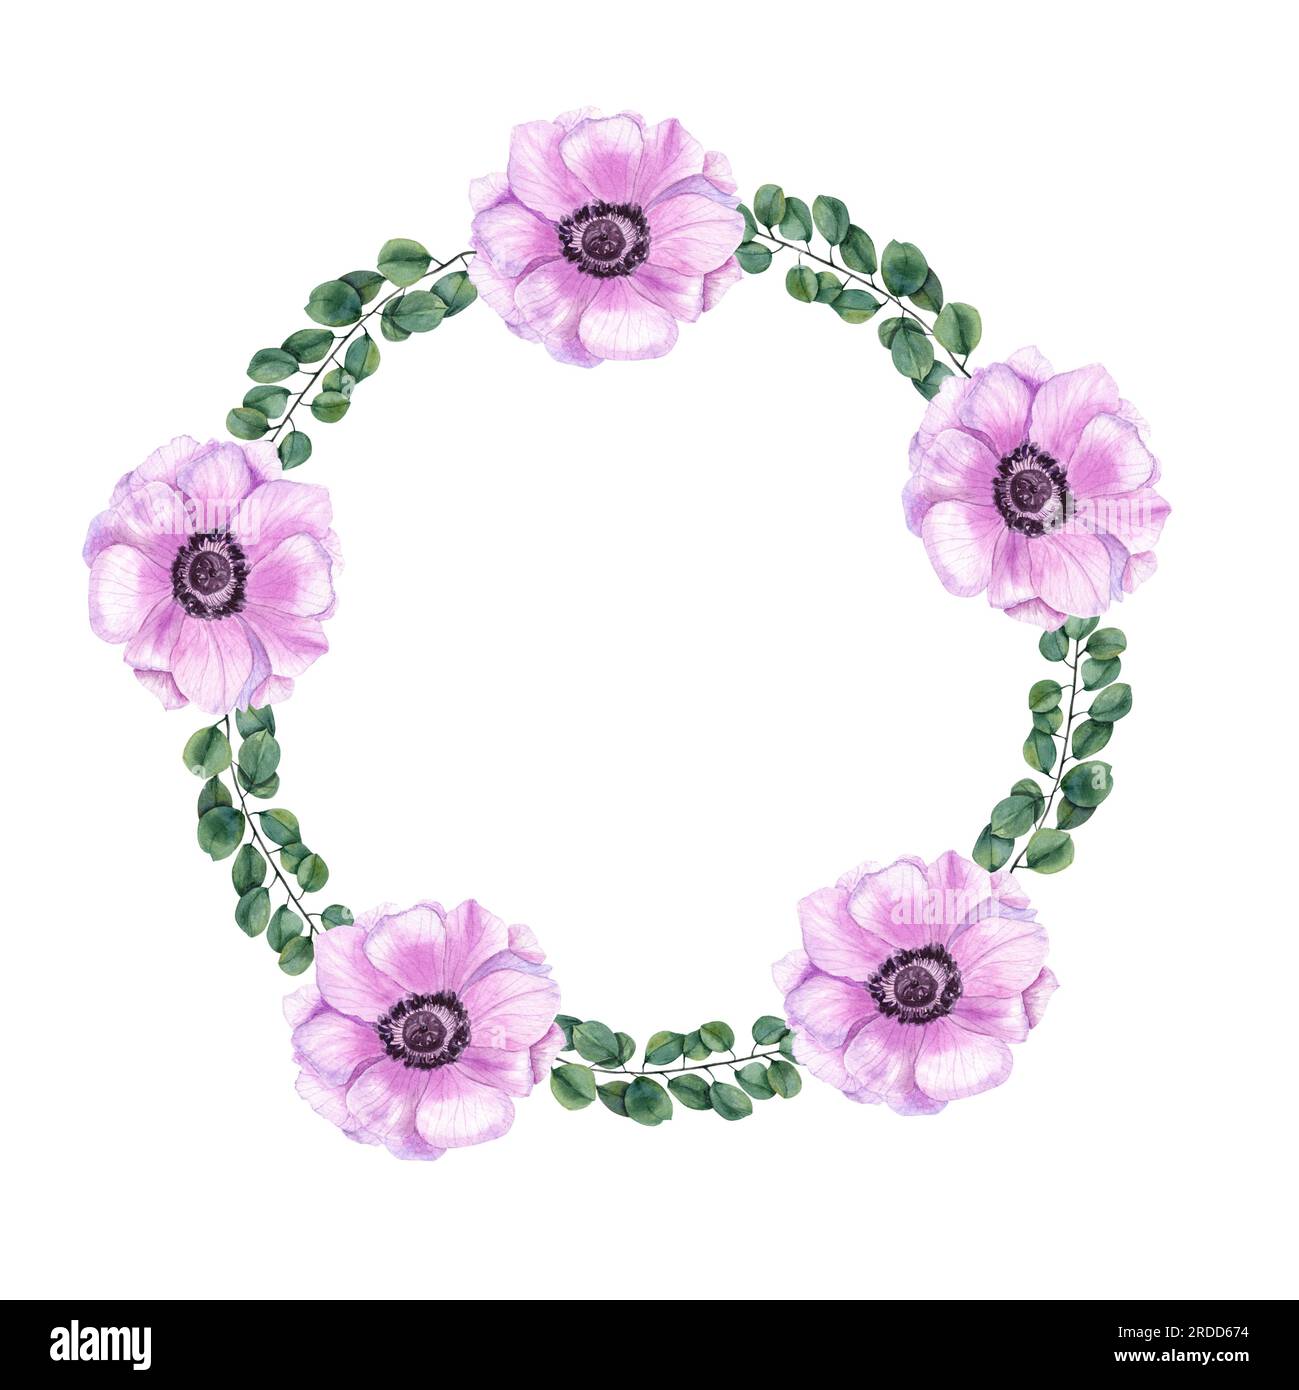 Watercolor wreath with pink anemones and eucalyptus branches. Composition isolated on white background. Botanical illustration for postcard design Stock Photo